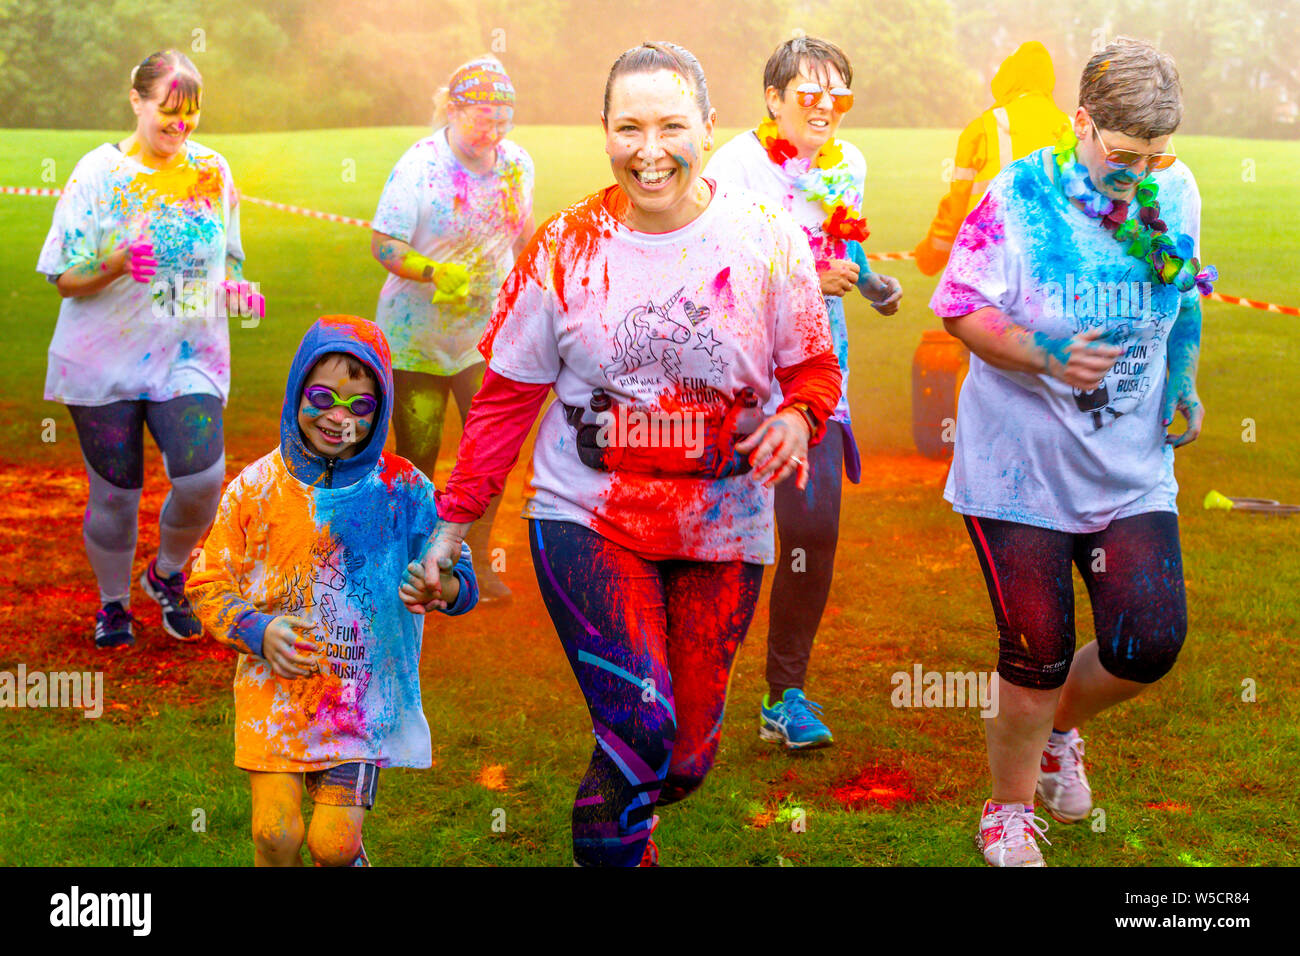 Northampton, UK. 28th July 2019. Fun Colour Rush in Abington Park, a family event with over 1500 taking part in the rain out of the people entered, raising money for 3 different charities, six waves going off in 15 minuets intervals, a wet morning but people still having a fun time. Credit: Keith J Smith./Alamy Live Stock Photo